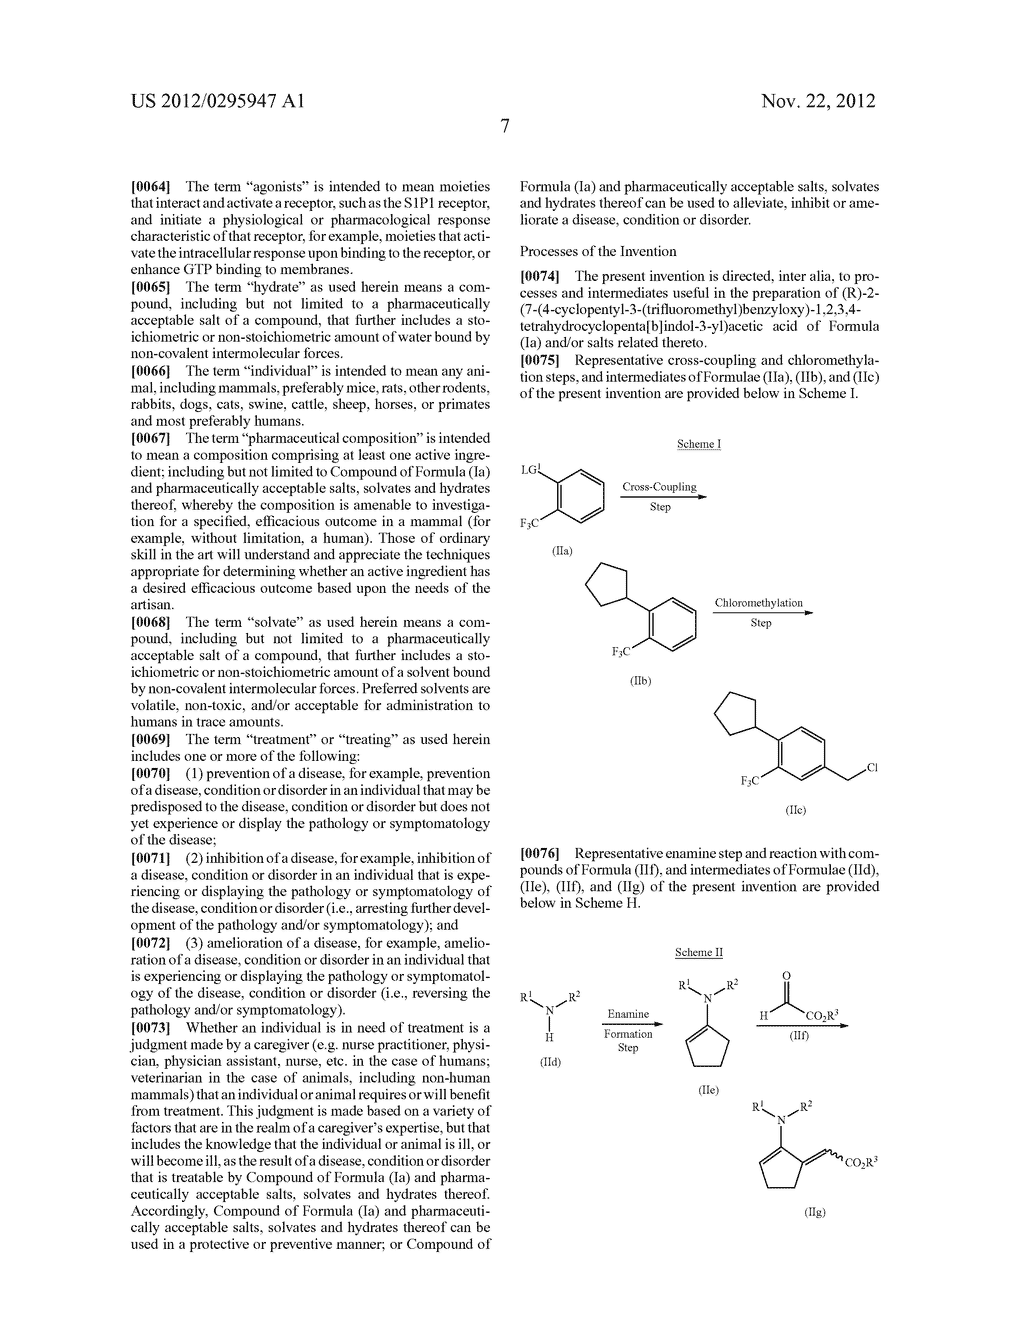 PROCESSES FOR THE PREPARATION OF     (R)-2-(7-(4-CYCLOPENTYL-3-(TRIFLUOROMETHYL)BENZYLOXY)-1,2,3,4-TETRAHYDROC-    YCLOPENTA[B]INDOL-3-YL)ACETIC ACID AND SALTS THEREOF - diagram, schematic, and image 16